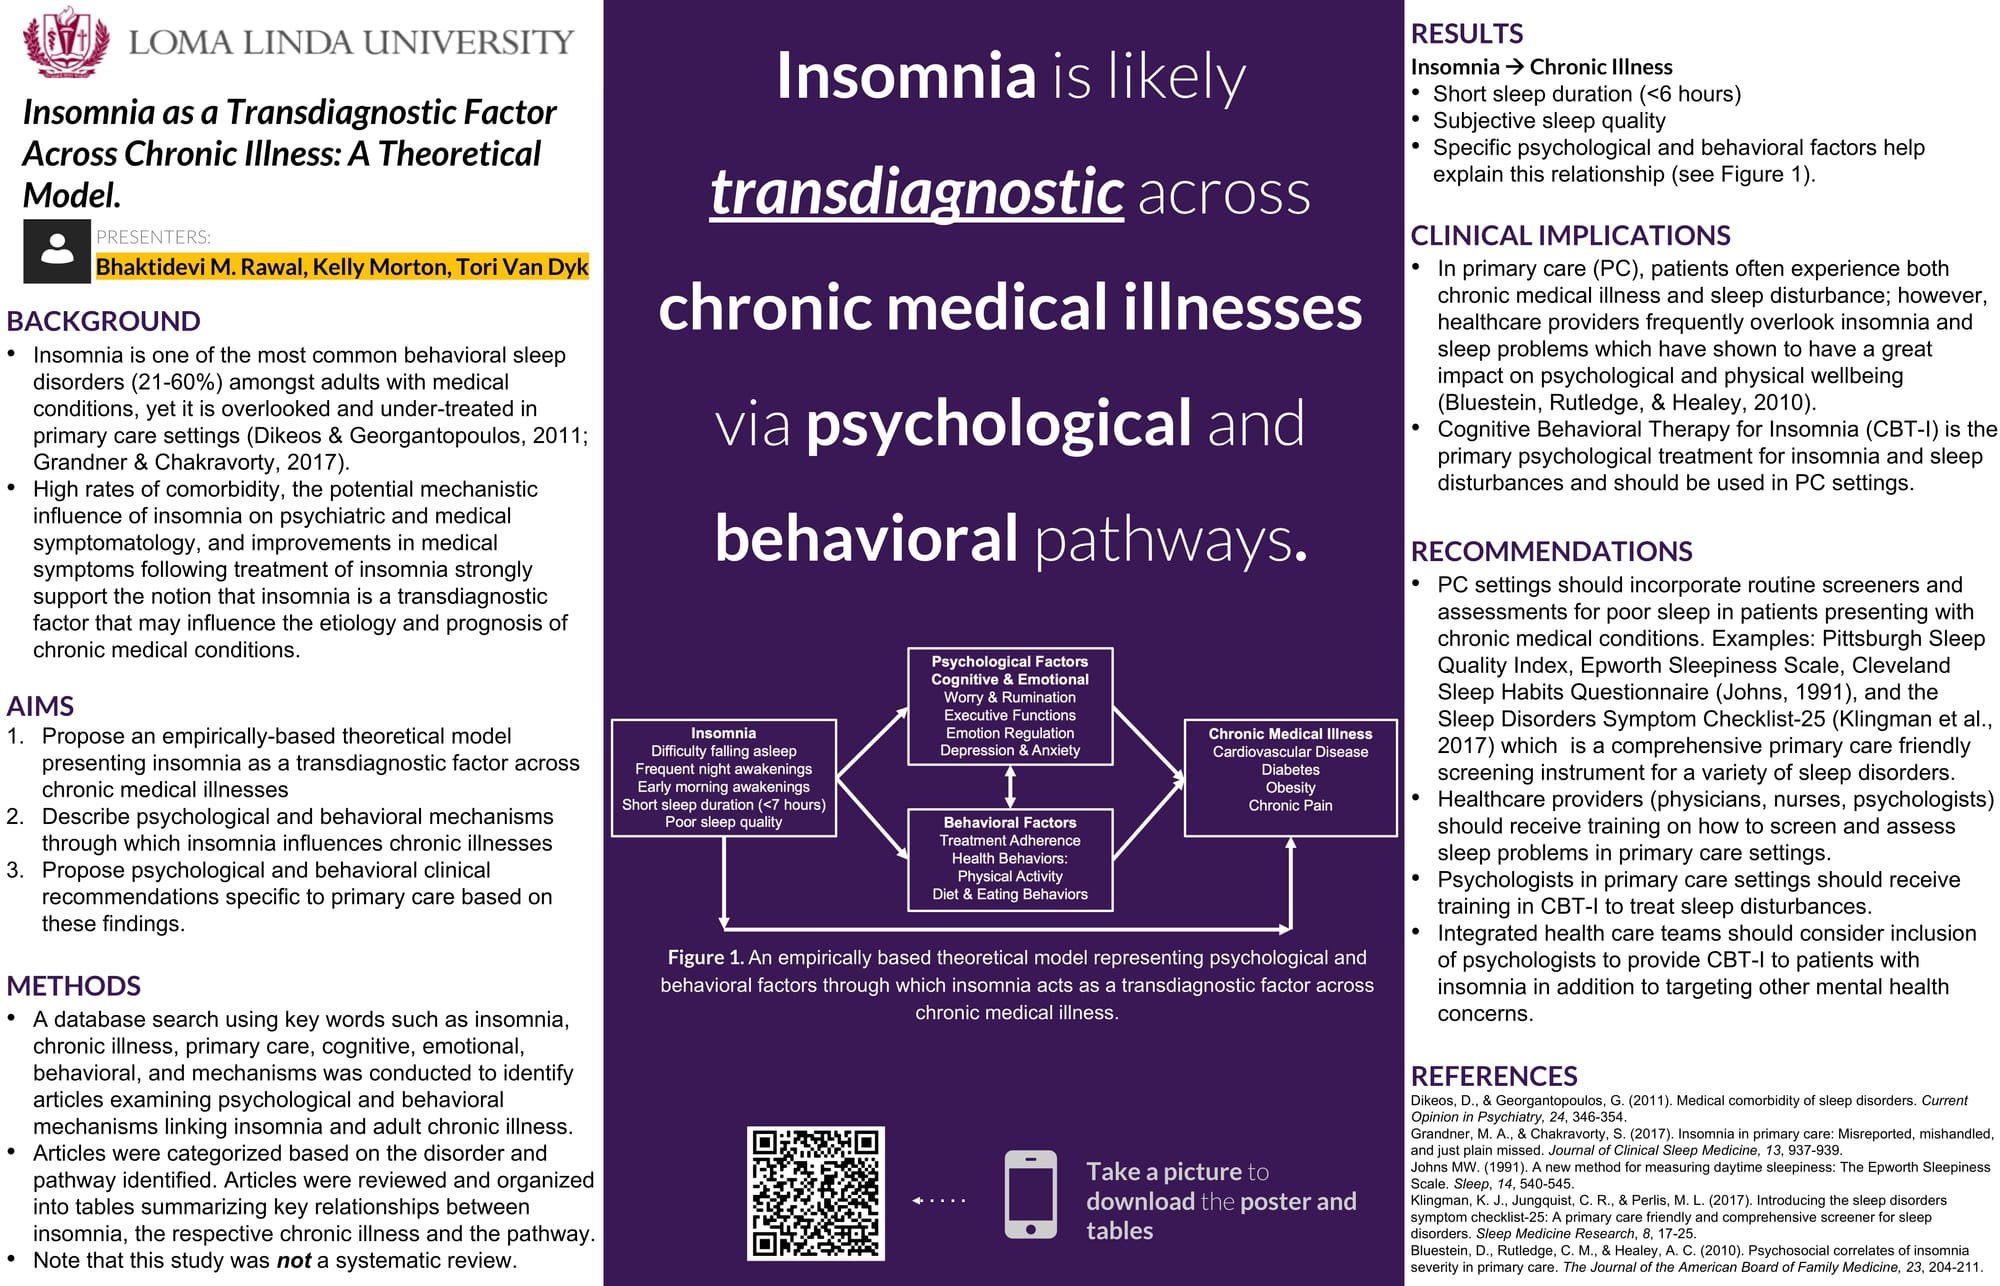 Insomnia as a Transdiagnostic Factor across Chronic Illness: A Theoretical Model